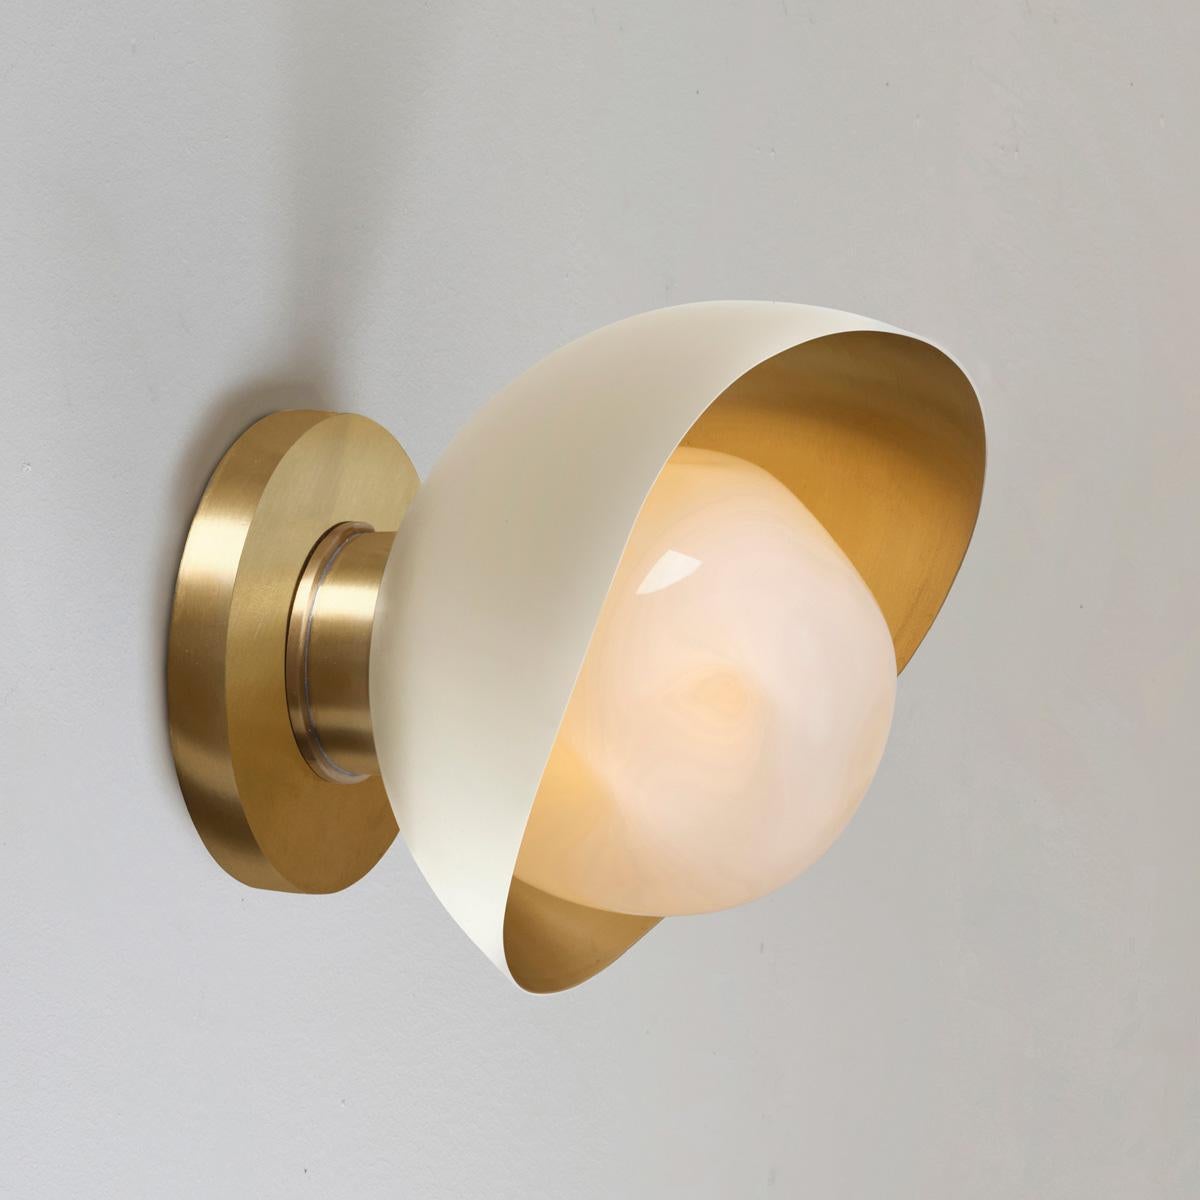 Perla Mini Wall Light by Gaspare Asaro. Powder Pink and Satin Brass Finish In New Condition For Sale In New York, NY